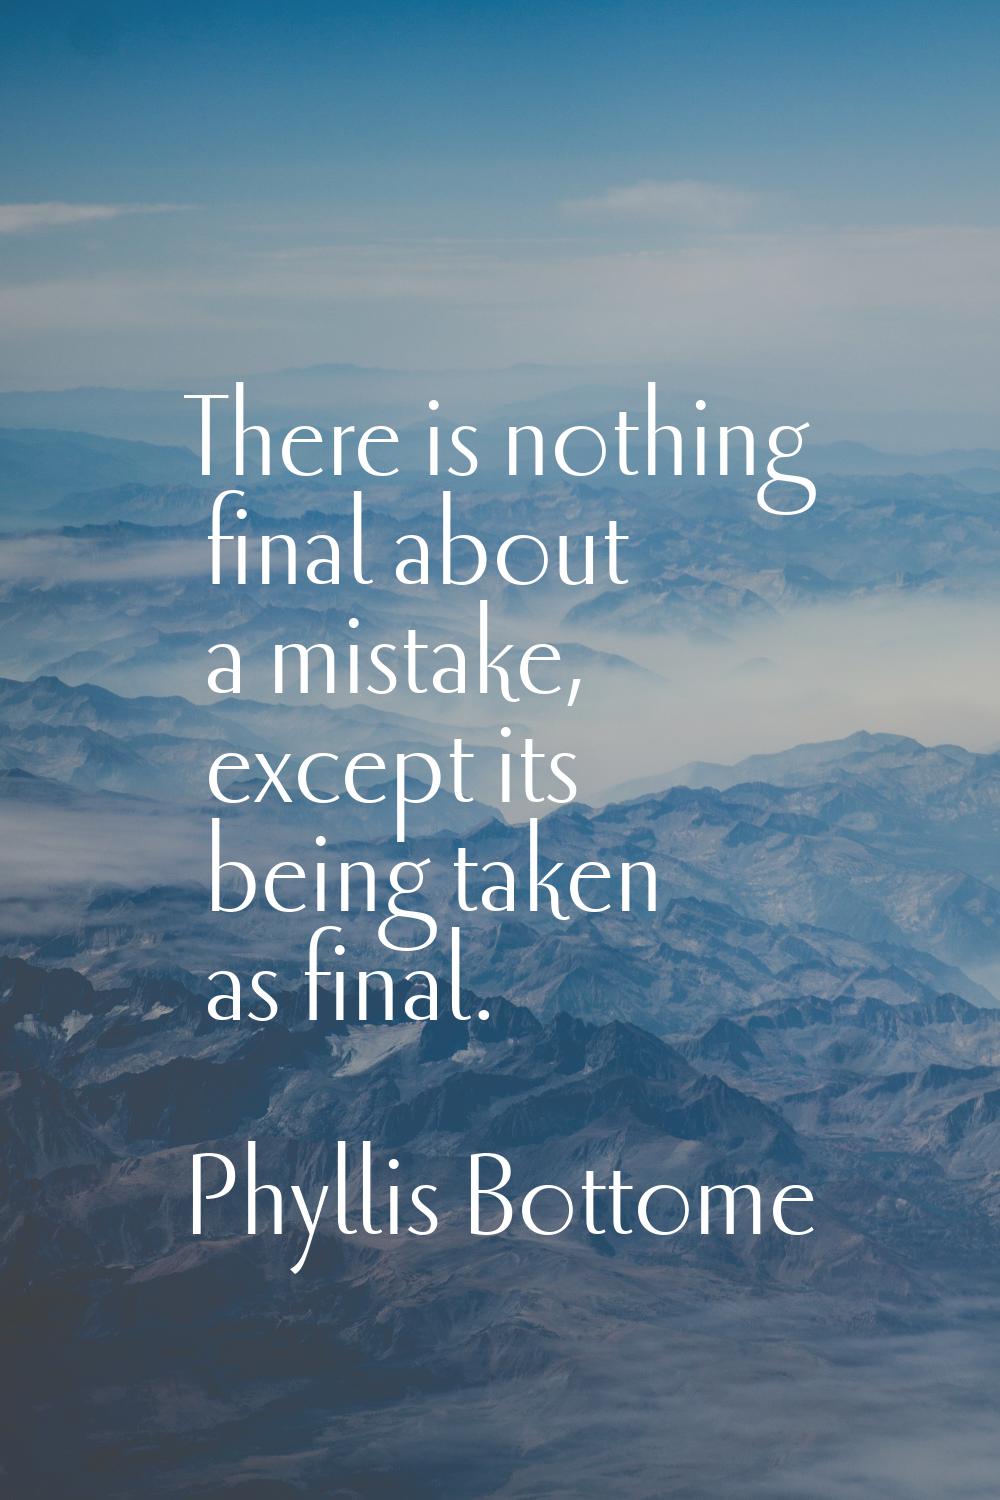 There is nothing final about a mistake, except its being taken as final.